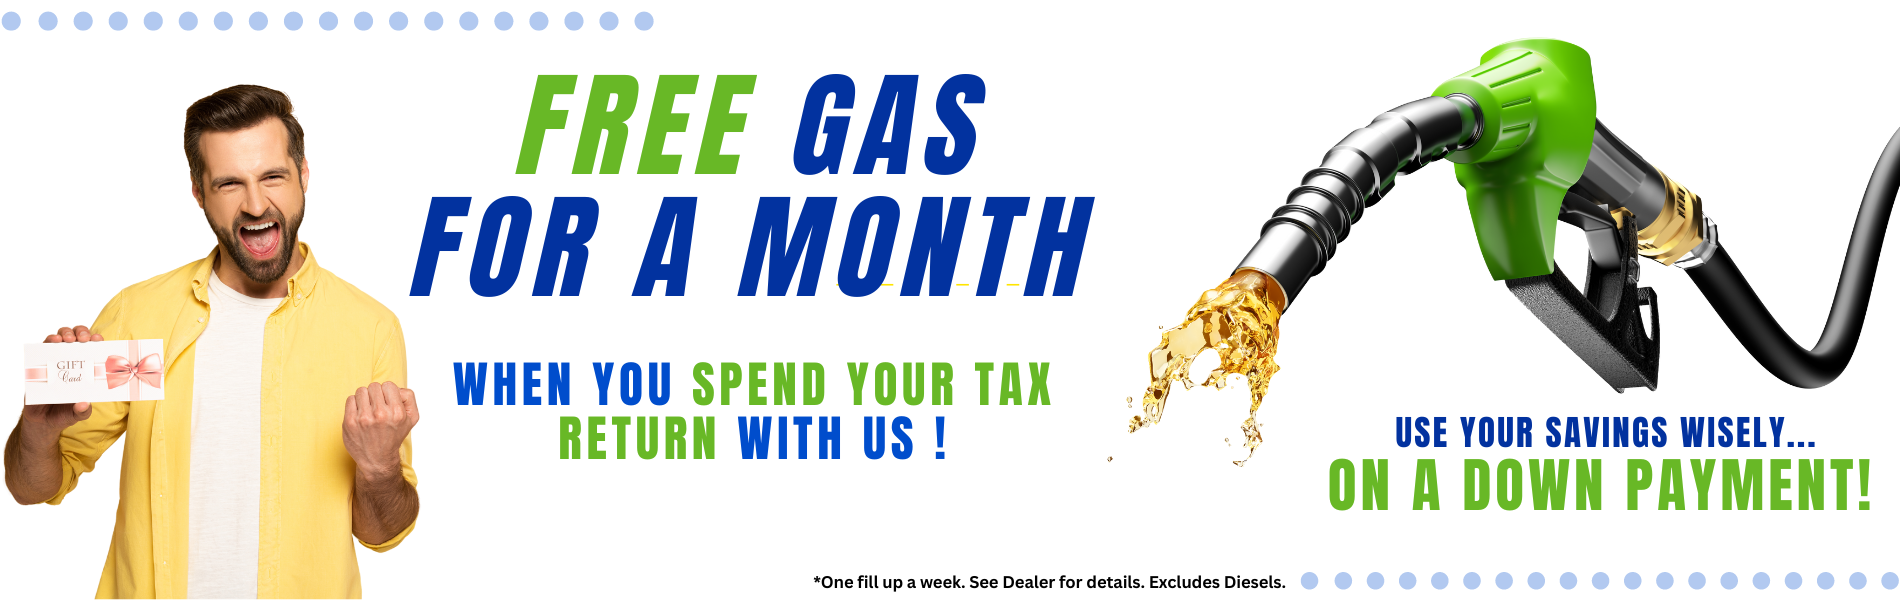 Free Gas Money For a Month 